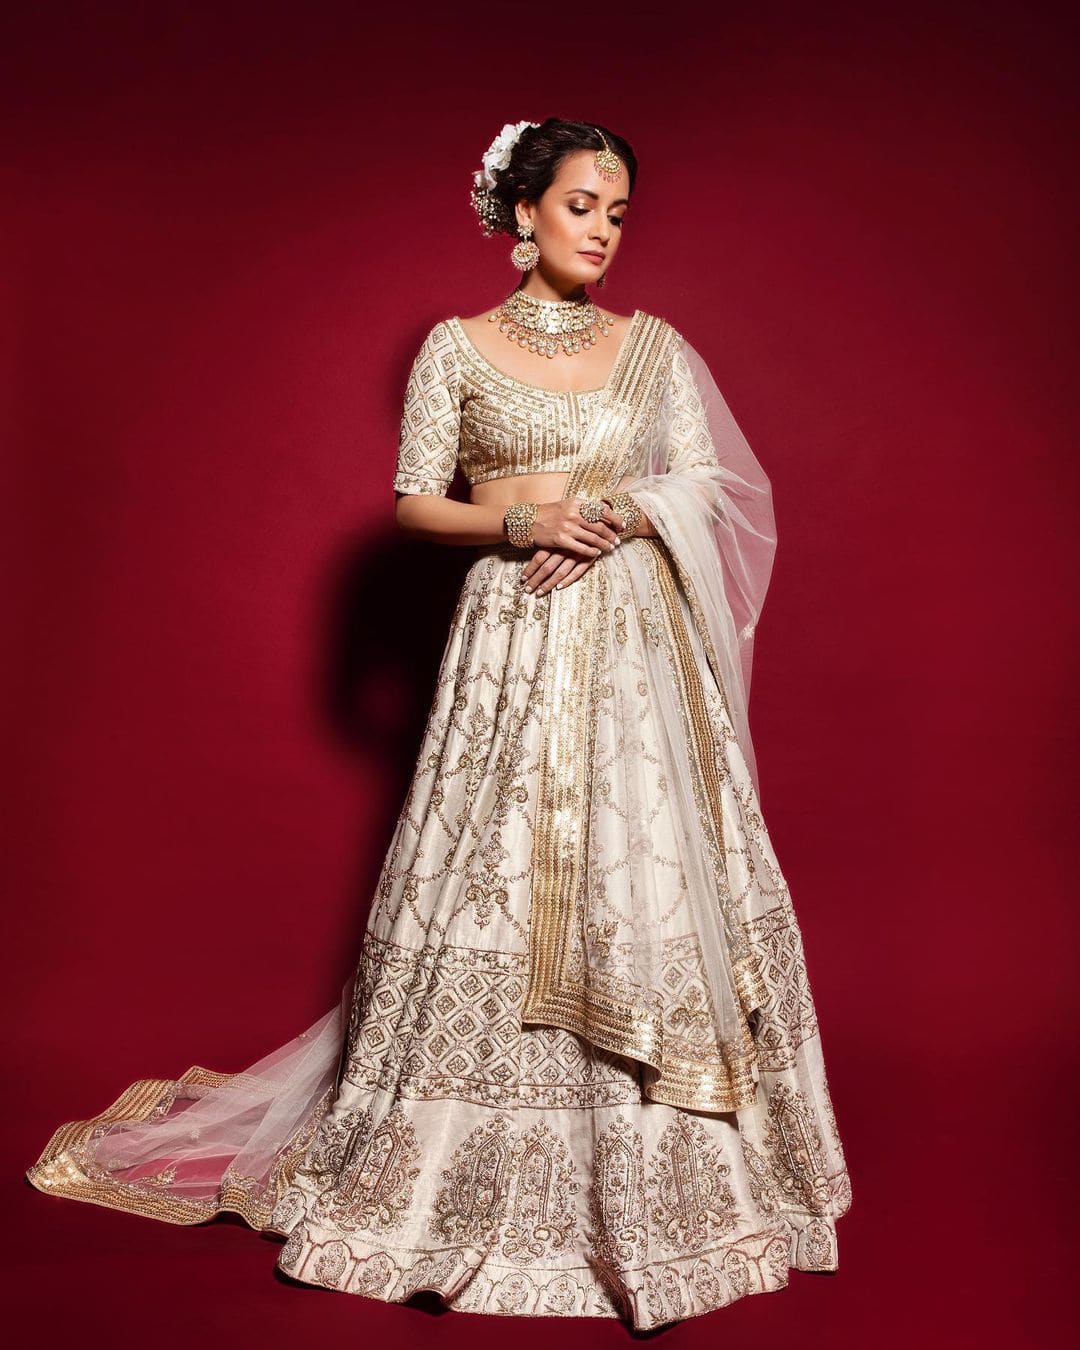 Dia Mirza is elegance personified in a white and gold lehenga set